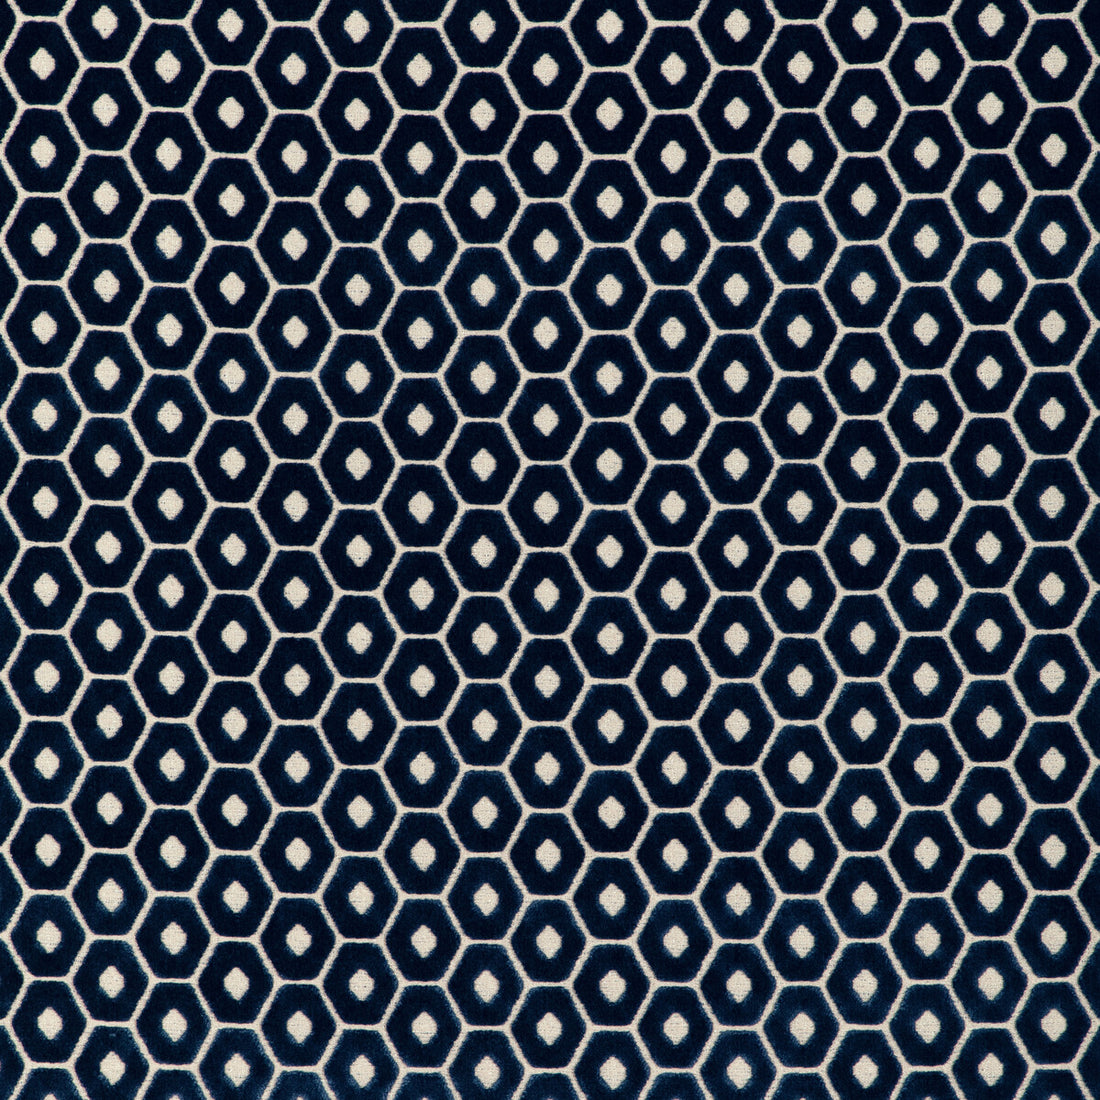 Kravet Design fabric in 37138-51 color - pattern 37138.51.0 - by Kravet Design in the Woven Colors collection